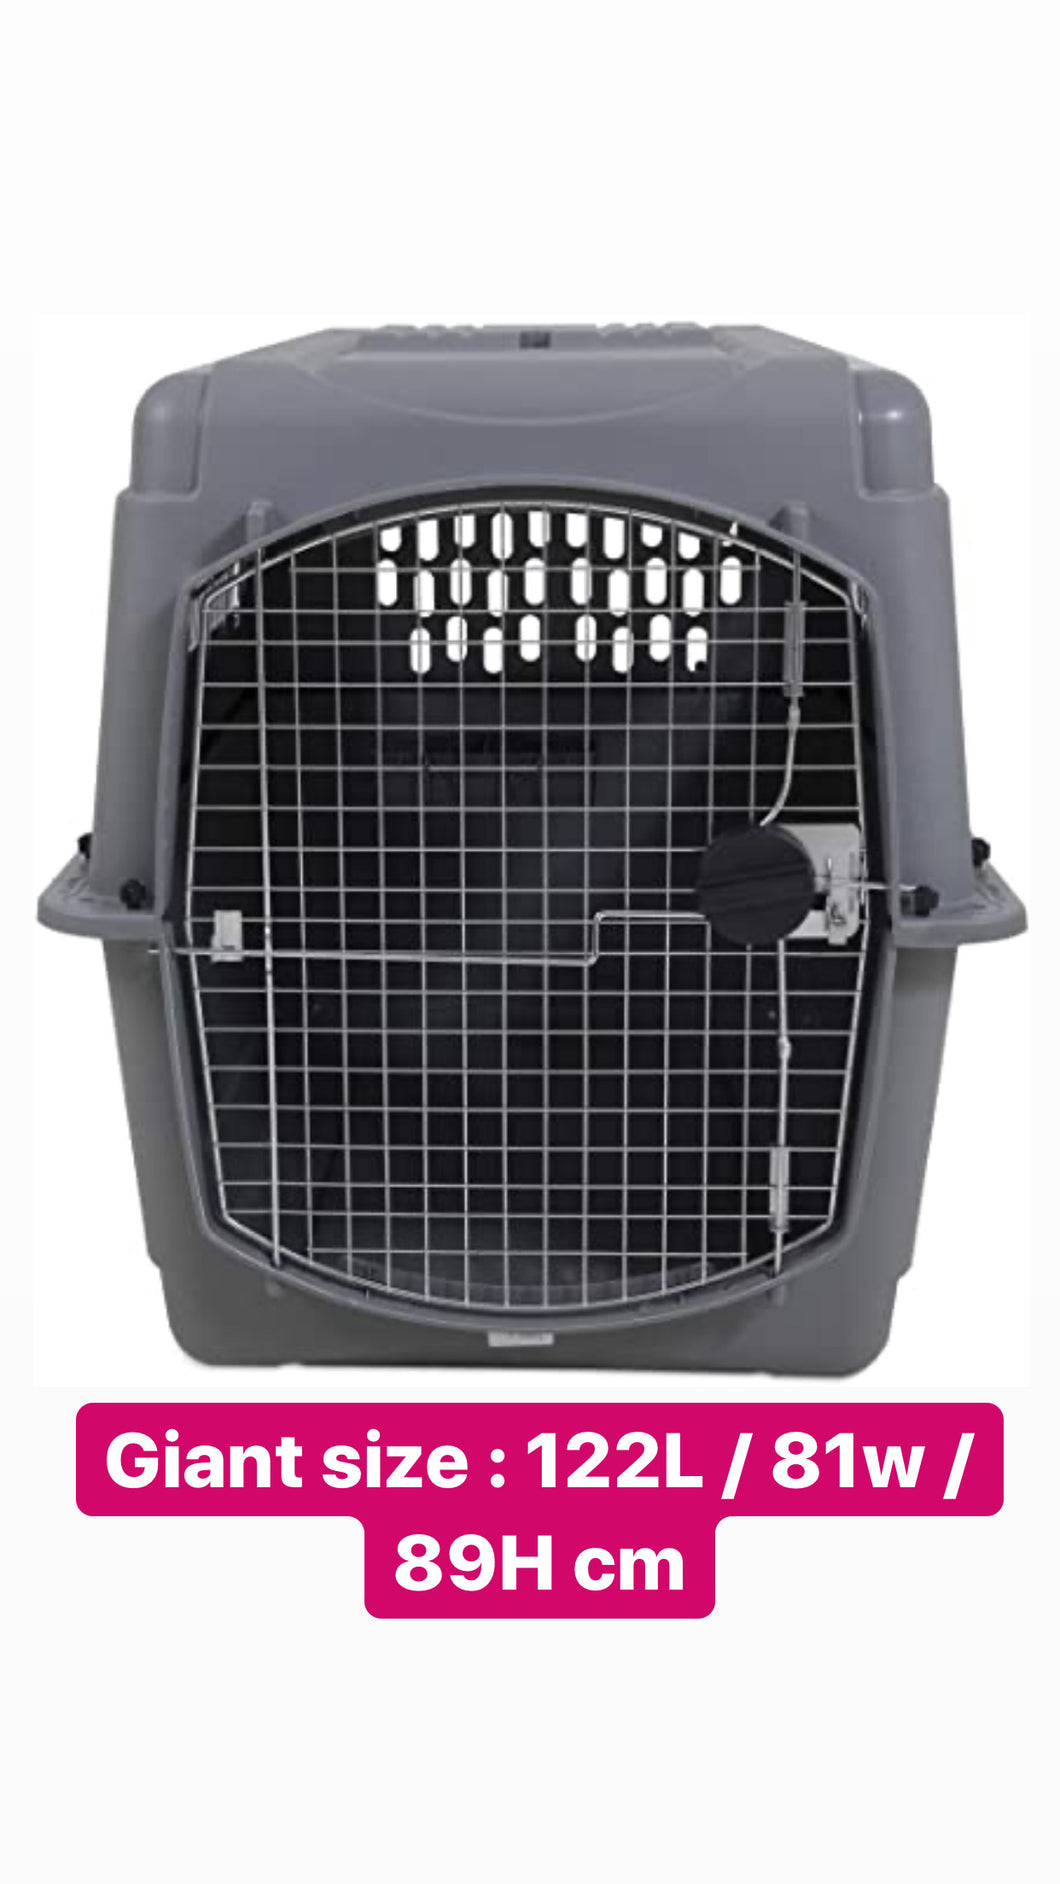 Sky Kennel 00700 AIRLINE APPROVED (IATA) 122L×81w ×89H. Cm